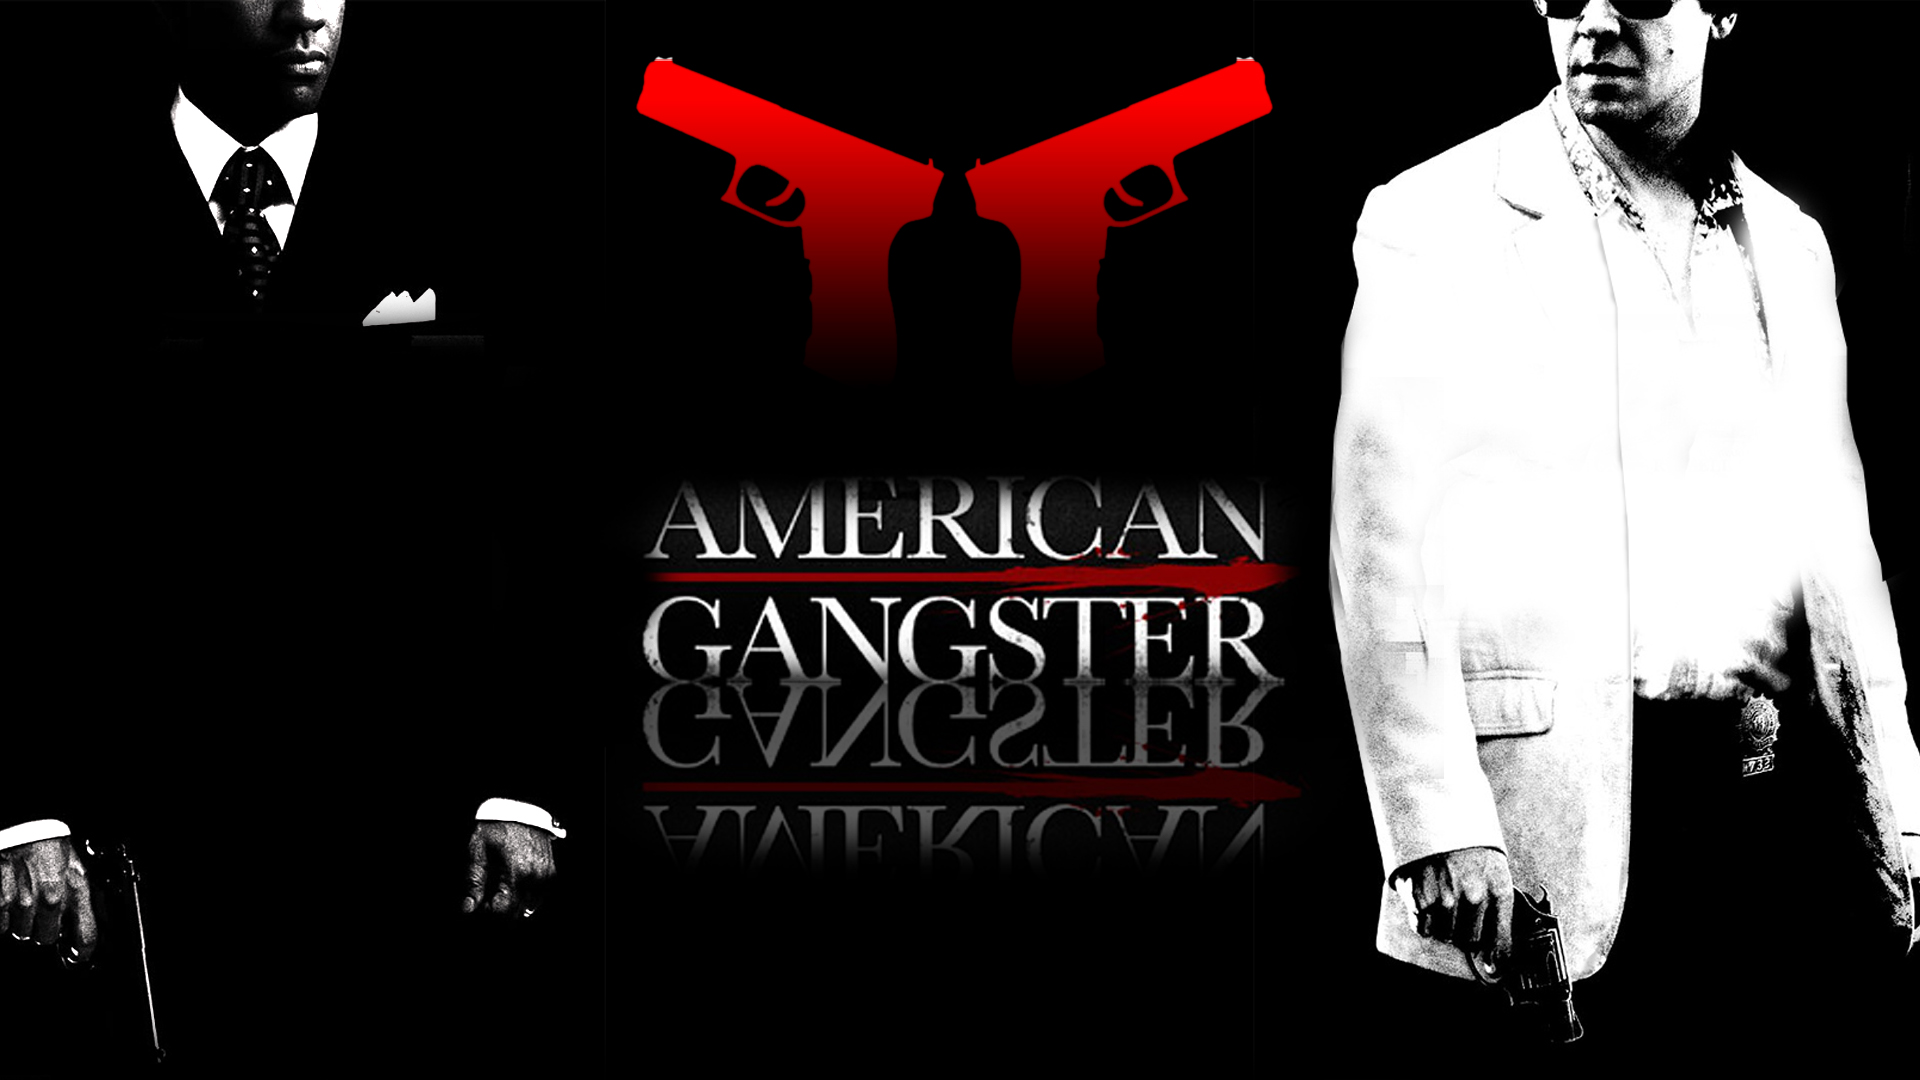 Amazing American Gangster Pictures & Backgrounds